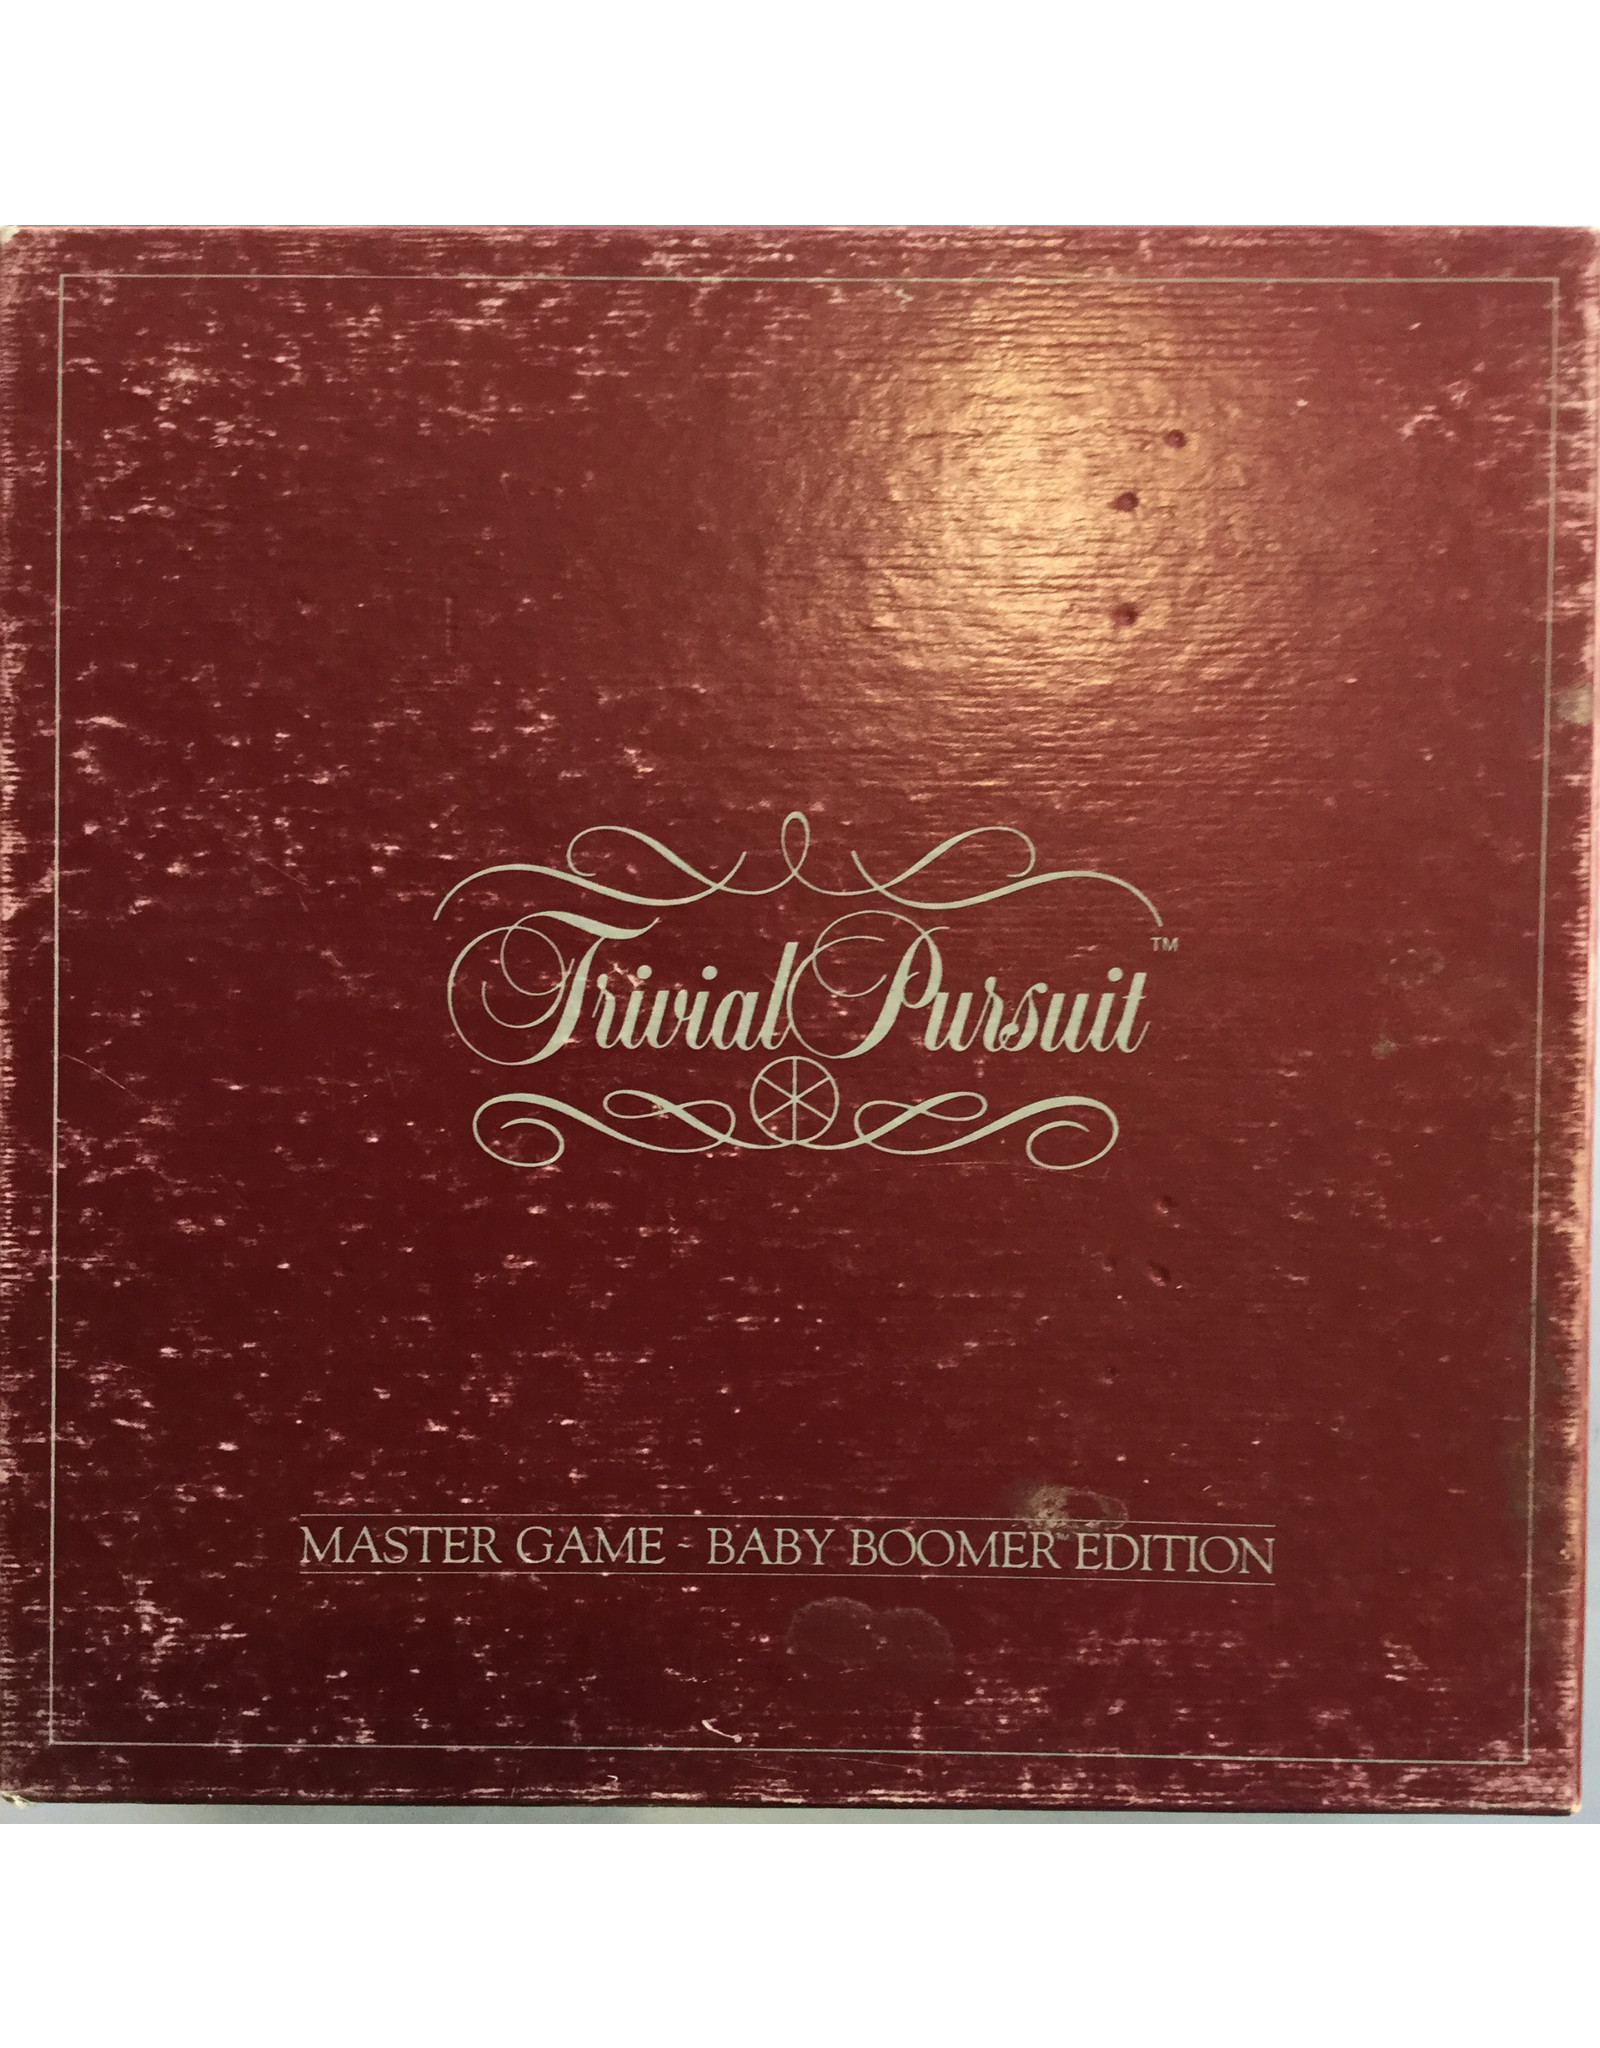 Horn Abbot Trivial Pursuit Master Game - Baby Boomer Edition (1981)